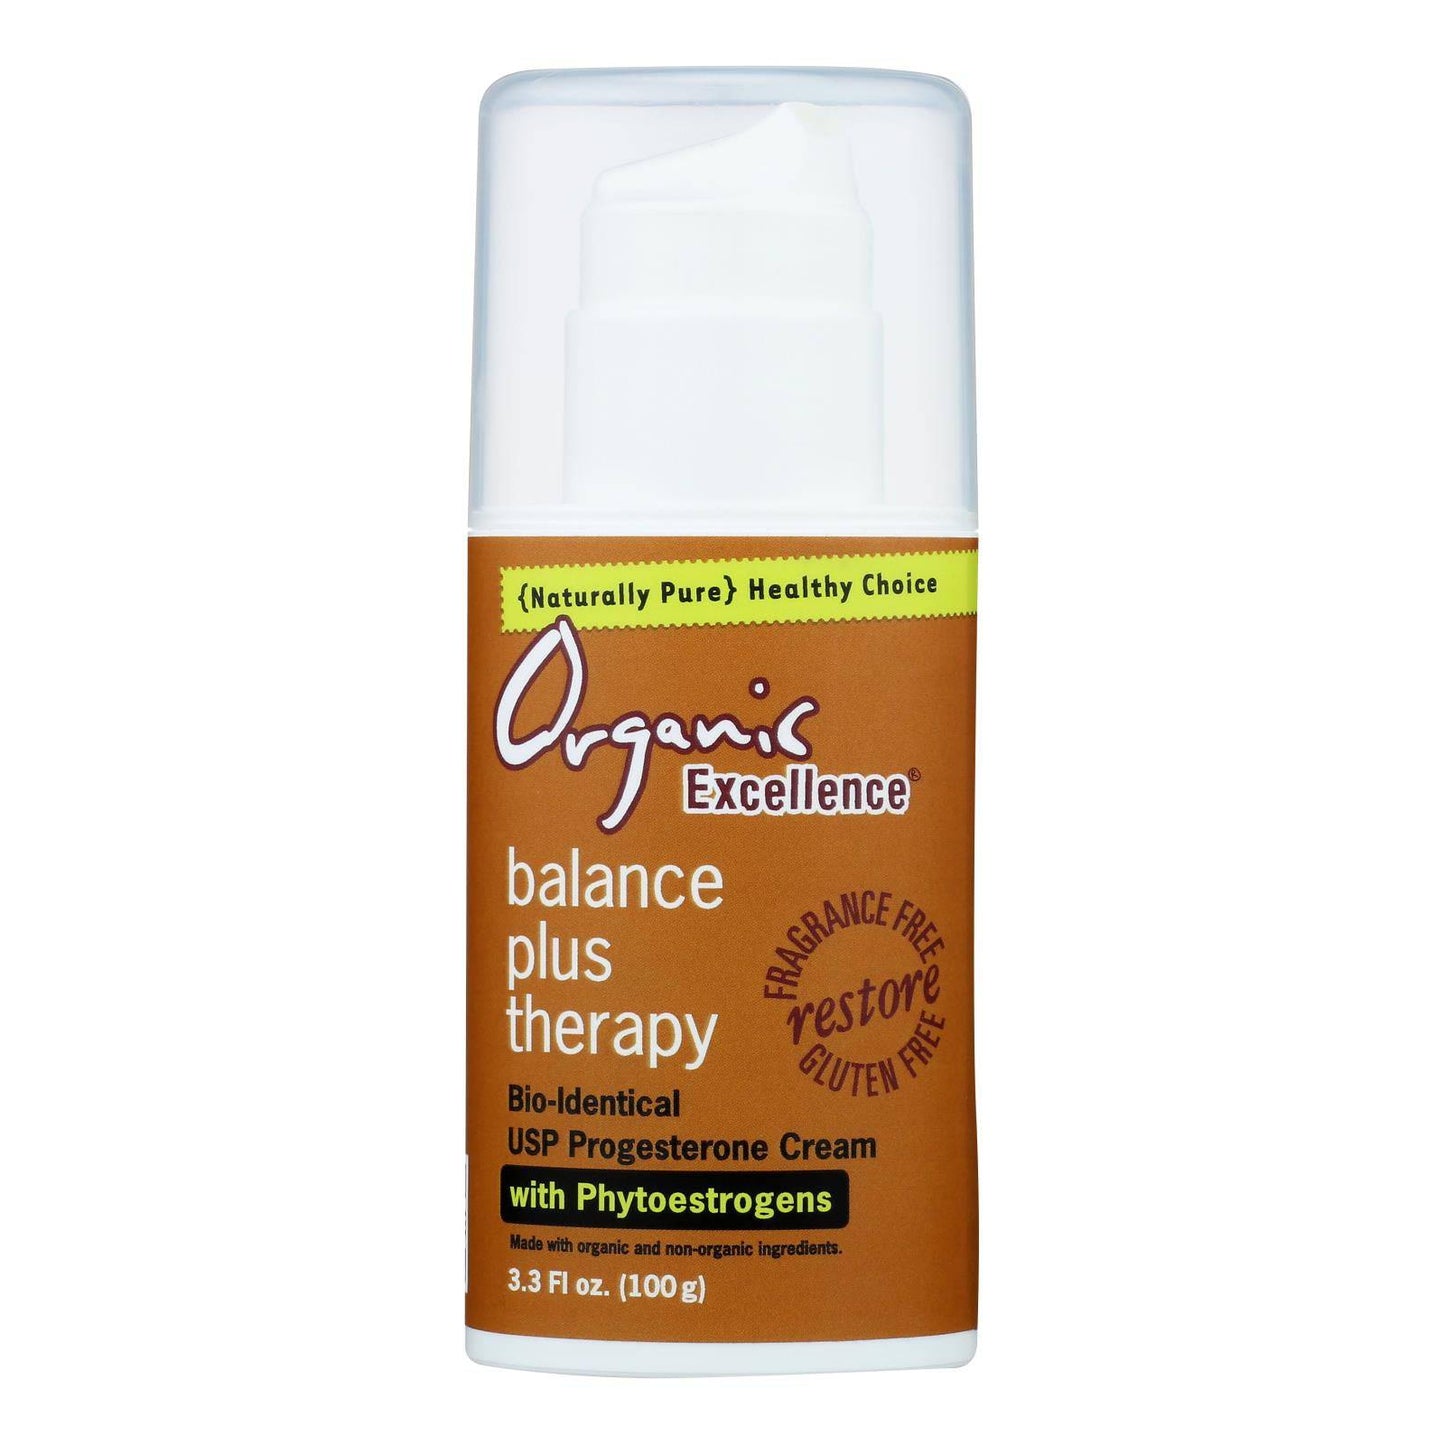 Buy Organic Excellence Balance Plus Therapy Bio-identical Progesterone Cream With Phytoestrogens - 3 Oz  at OnlyNaturals.us